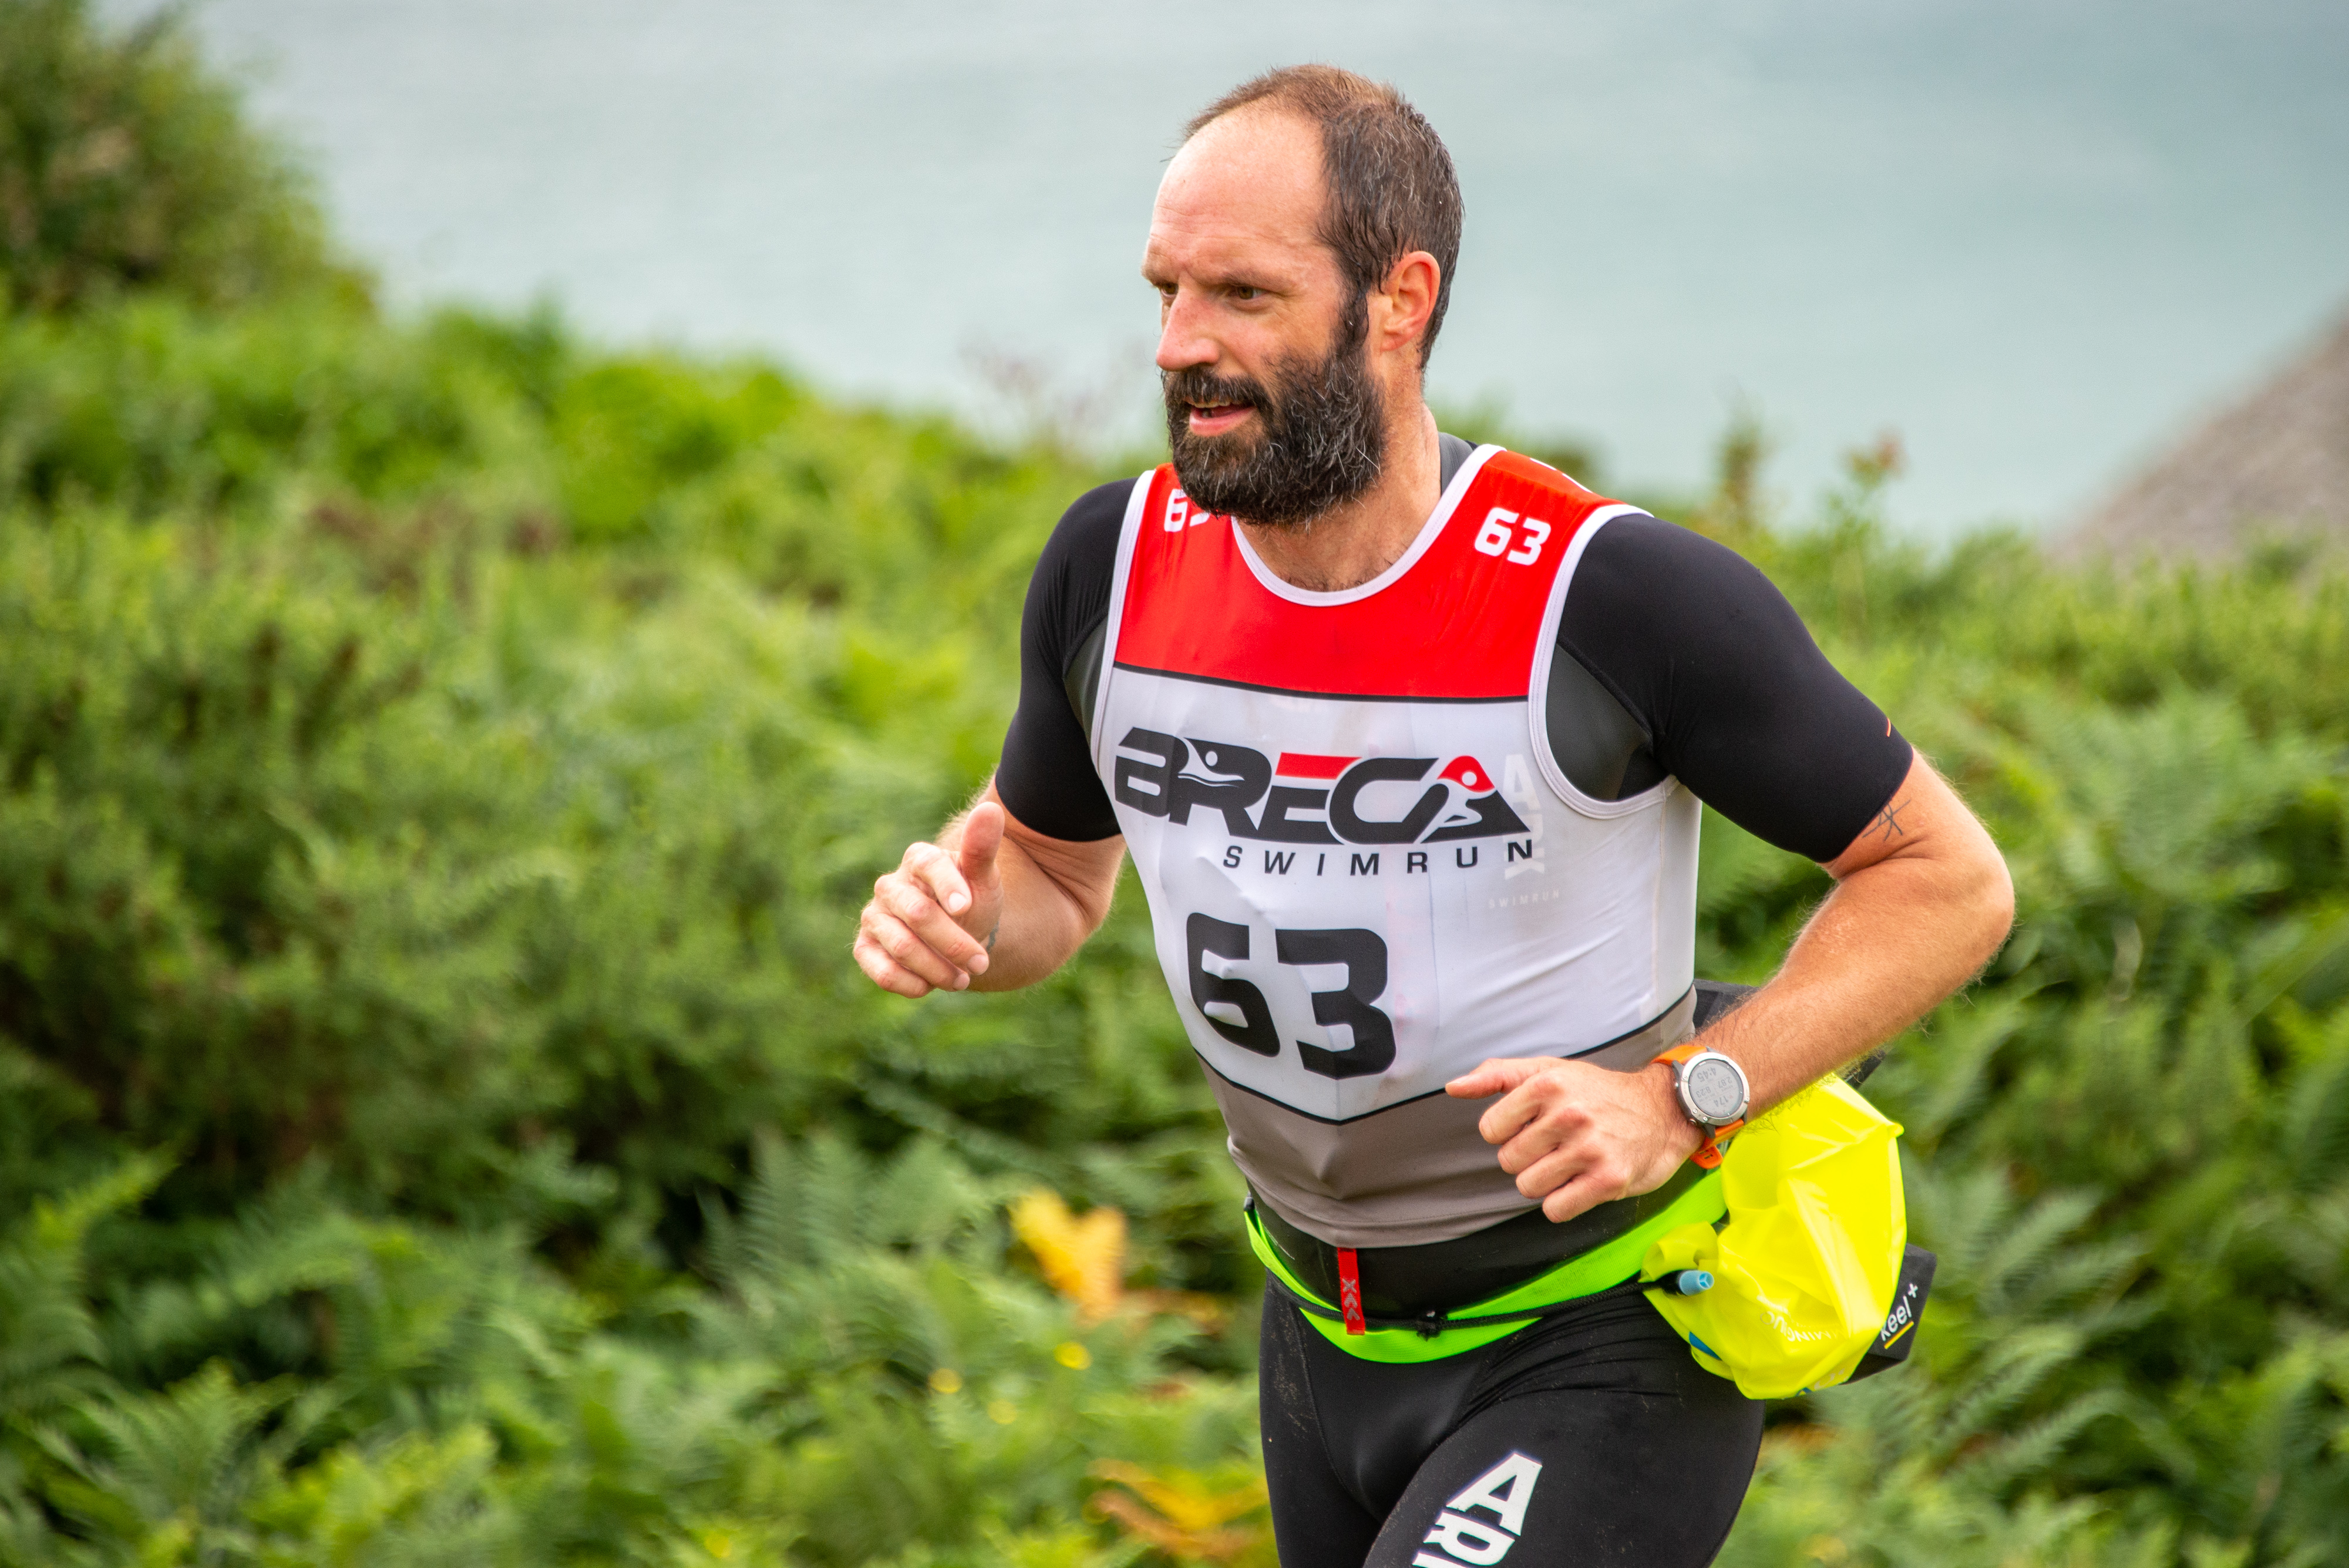 Swimrunner Jonathan Littlewood has acquired Breca and is planning a relaunch with races starting later this year.